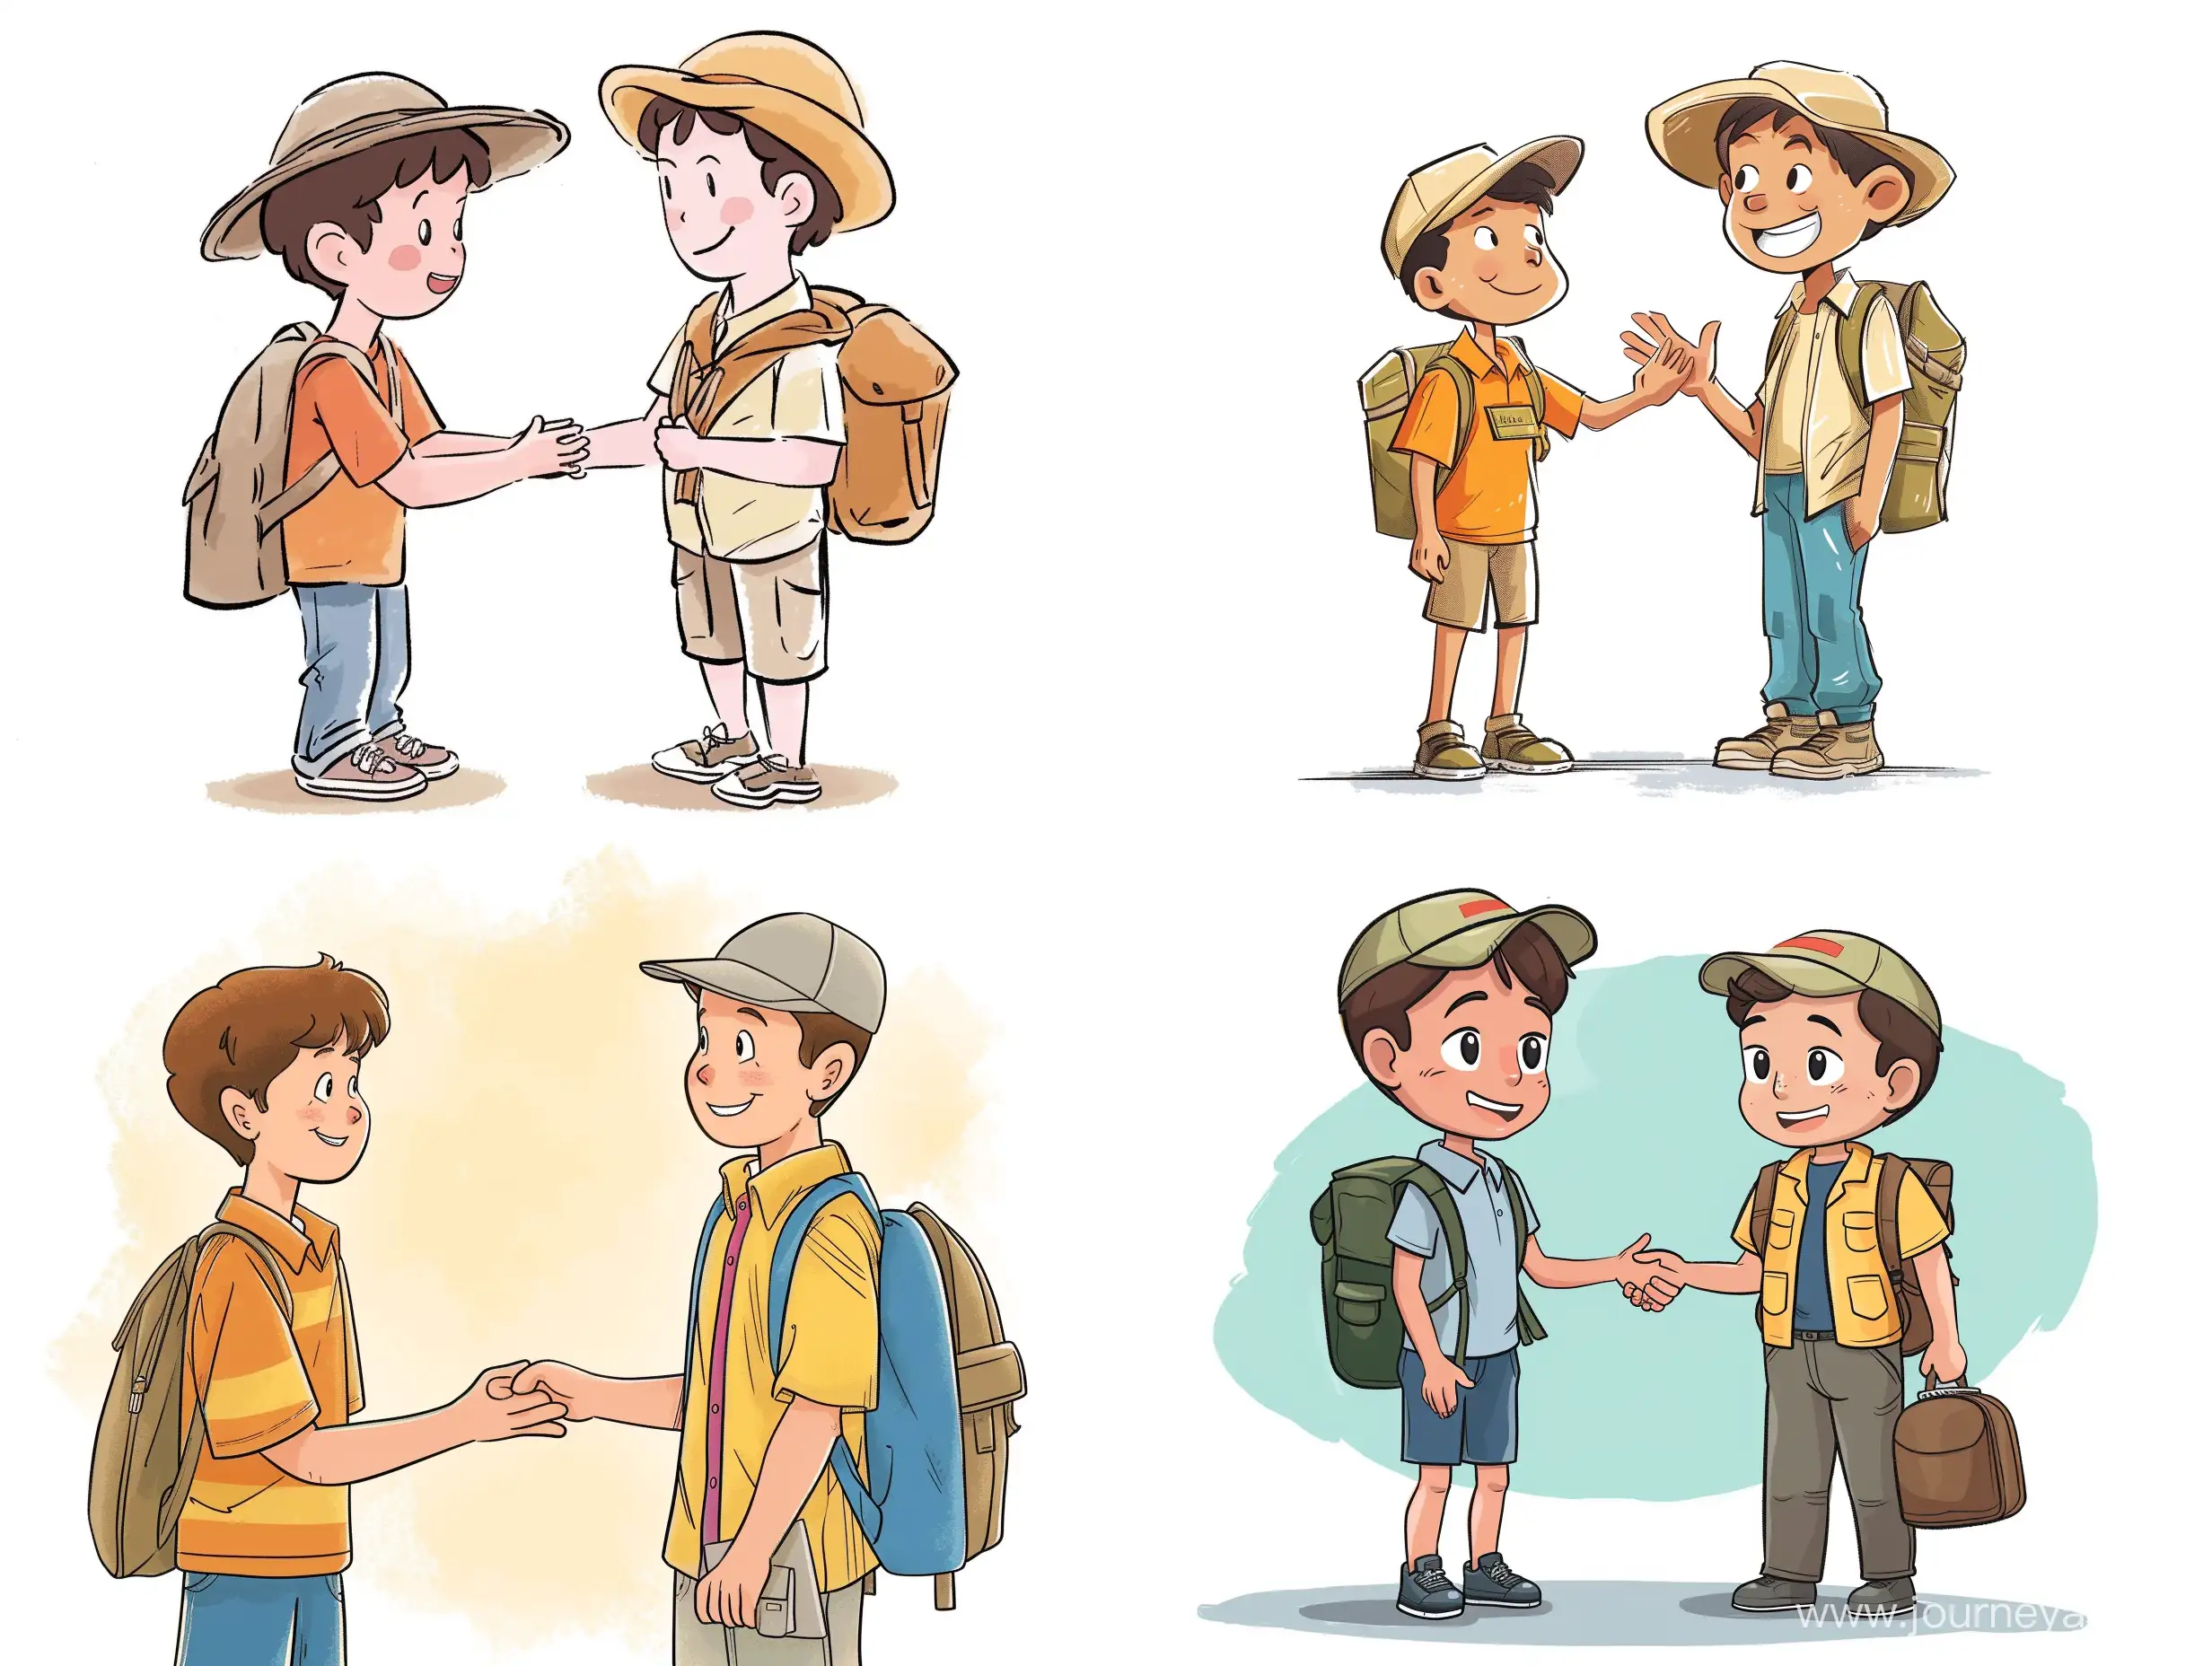 Cheerful-Boy-Welcoming-Tour-Guide-in-Playful-Cartoon-Sketch